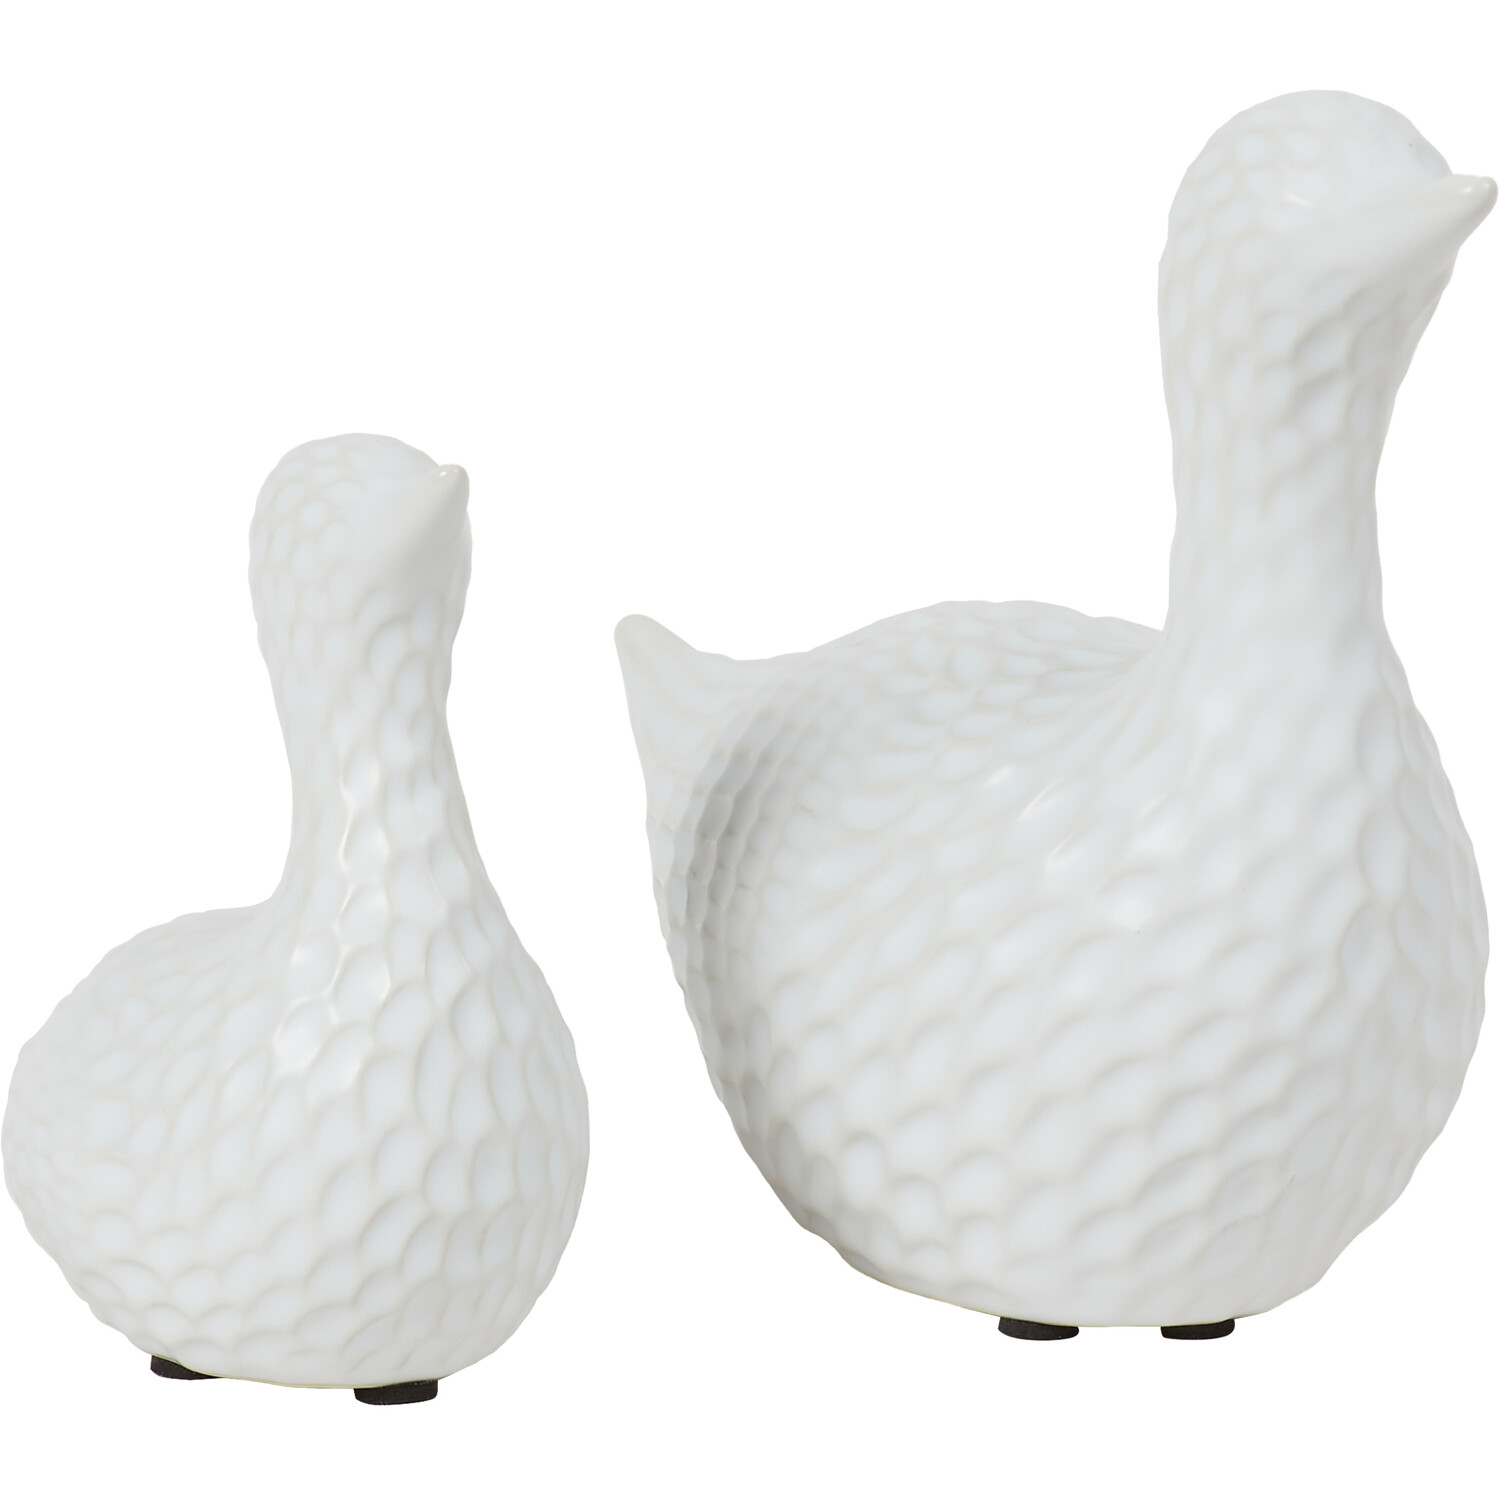 White Duck Ornament 2 Pack Image 1